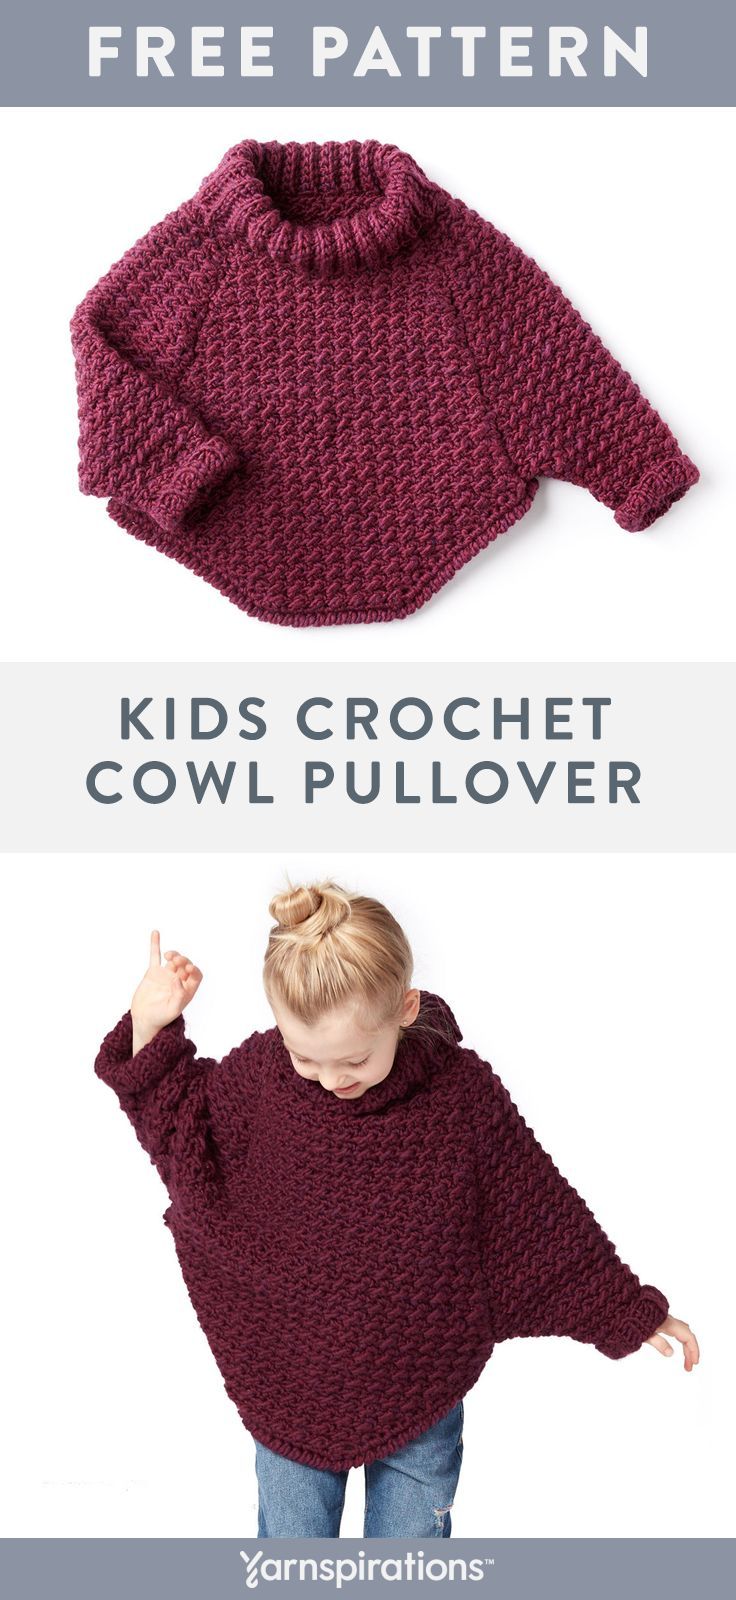 Free Girl’s Crochet Pullover Pattern | This beginner friendly crochet pullover is a perfect layering piece for your little one! Working a simple crochet stitch and some basic shaping this sweater is great for beginners. Crocheted in super soft Bernat Roving, this easy to care for yarn makes this sweater a staple for winter. #yarnspirations #bernatroving #kidscrochetpatterns #crochet #freecrochetpatterns